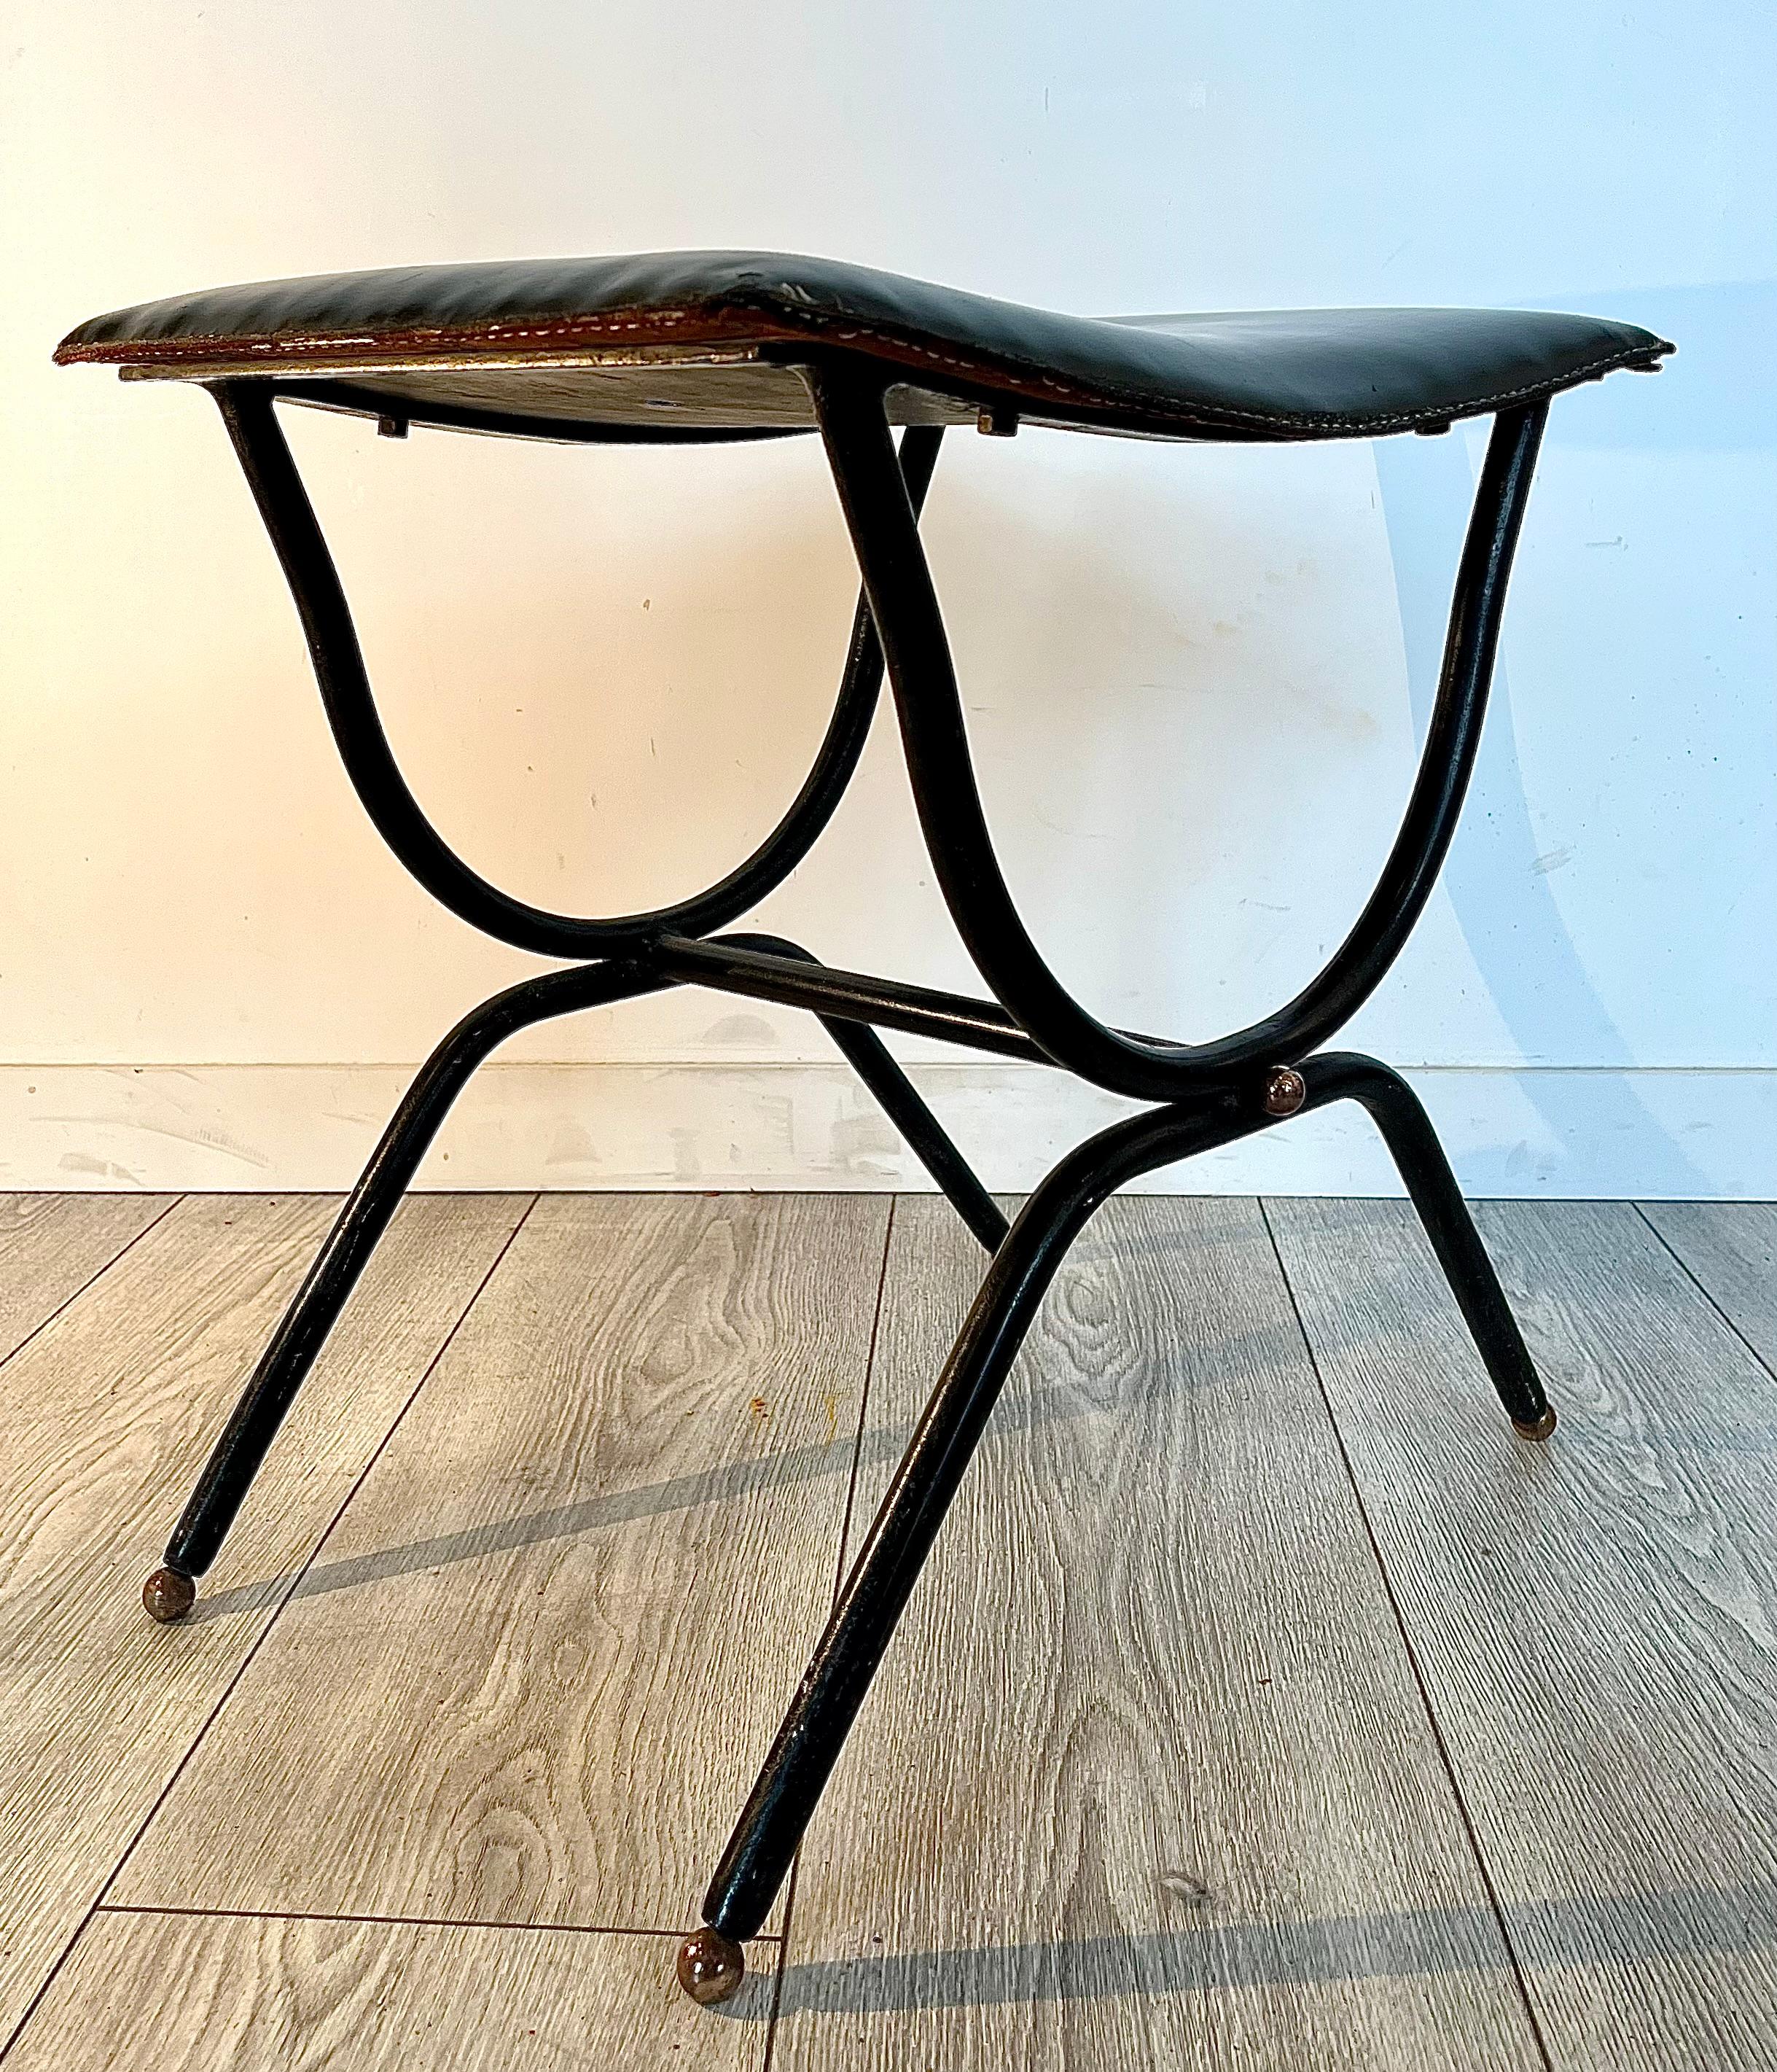 20th Century Jacques Adnet : Black leather stool, circa 1955